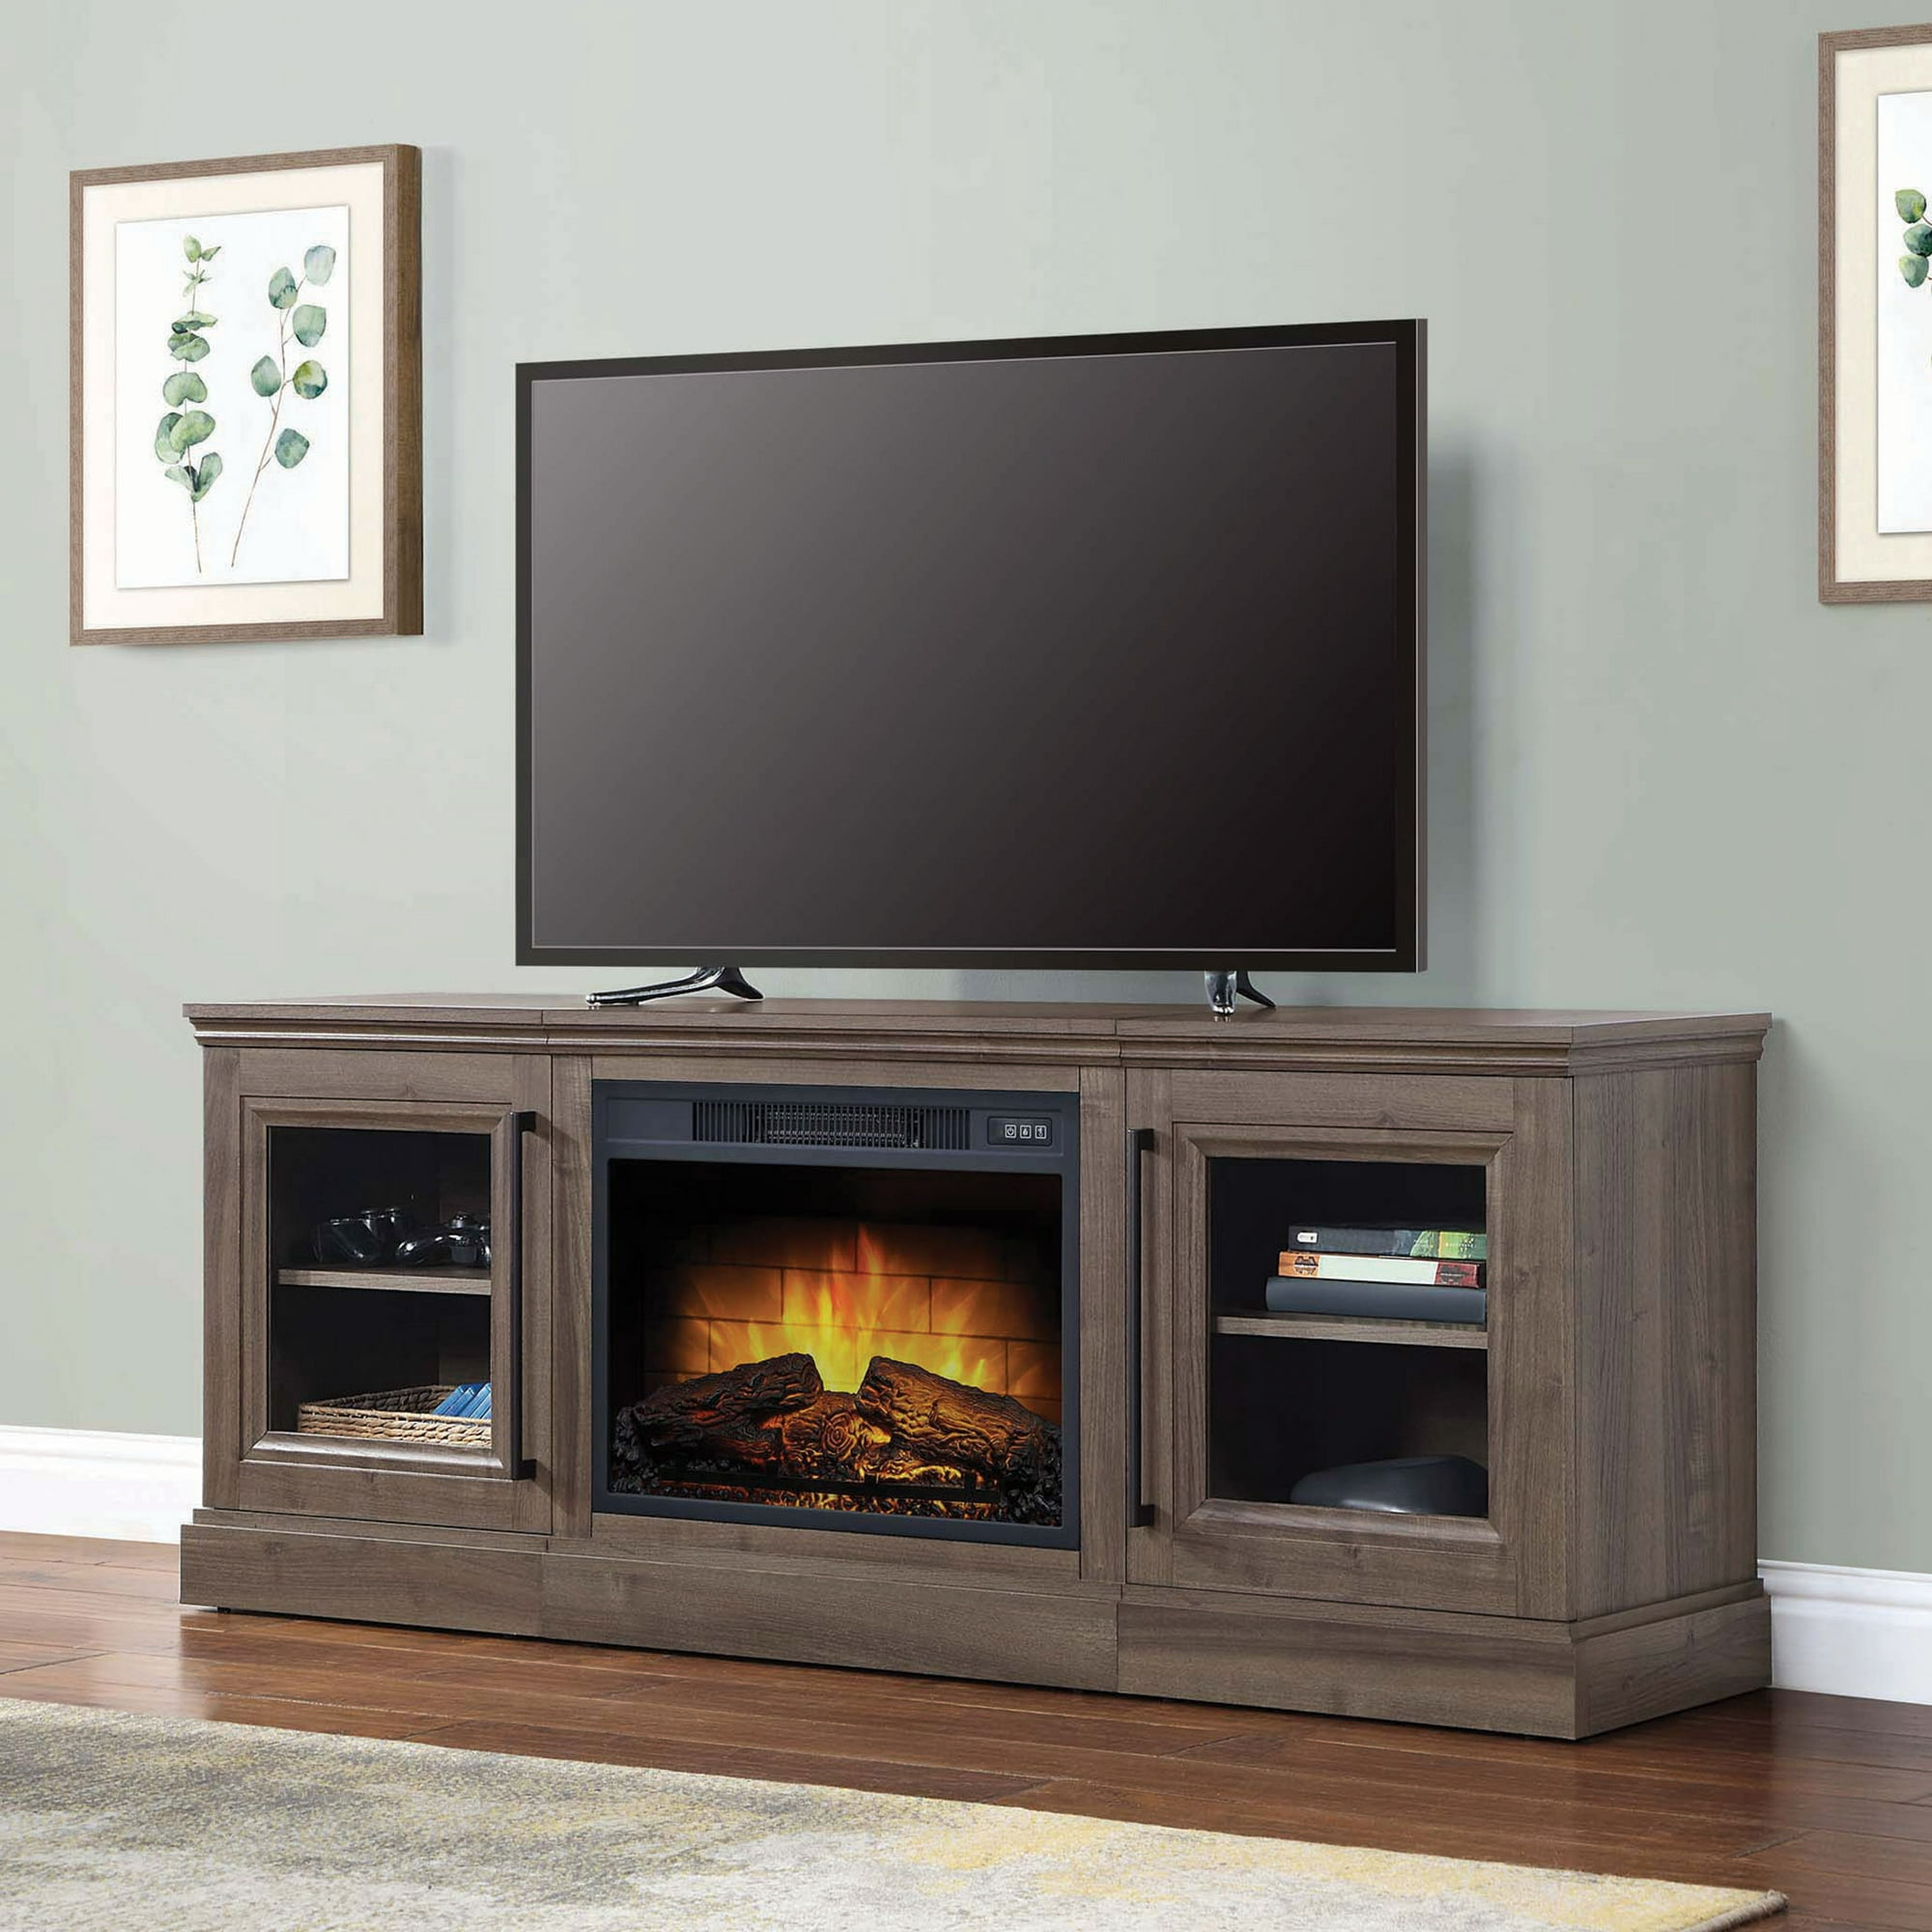 Whalen Quantum Flame Media Fireplace TV Stand for TV’s up to 75” in Walnut Brown Finish